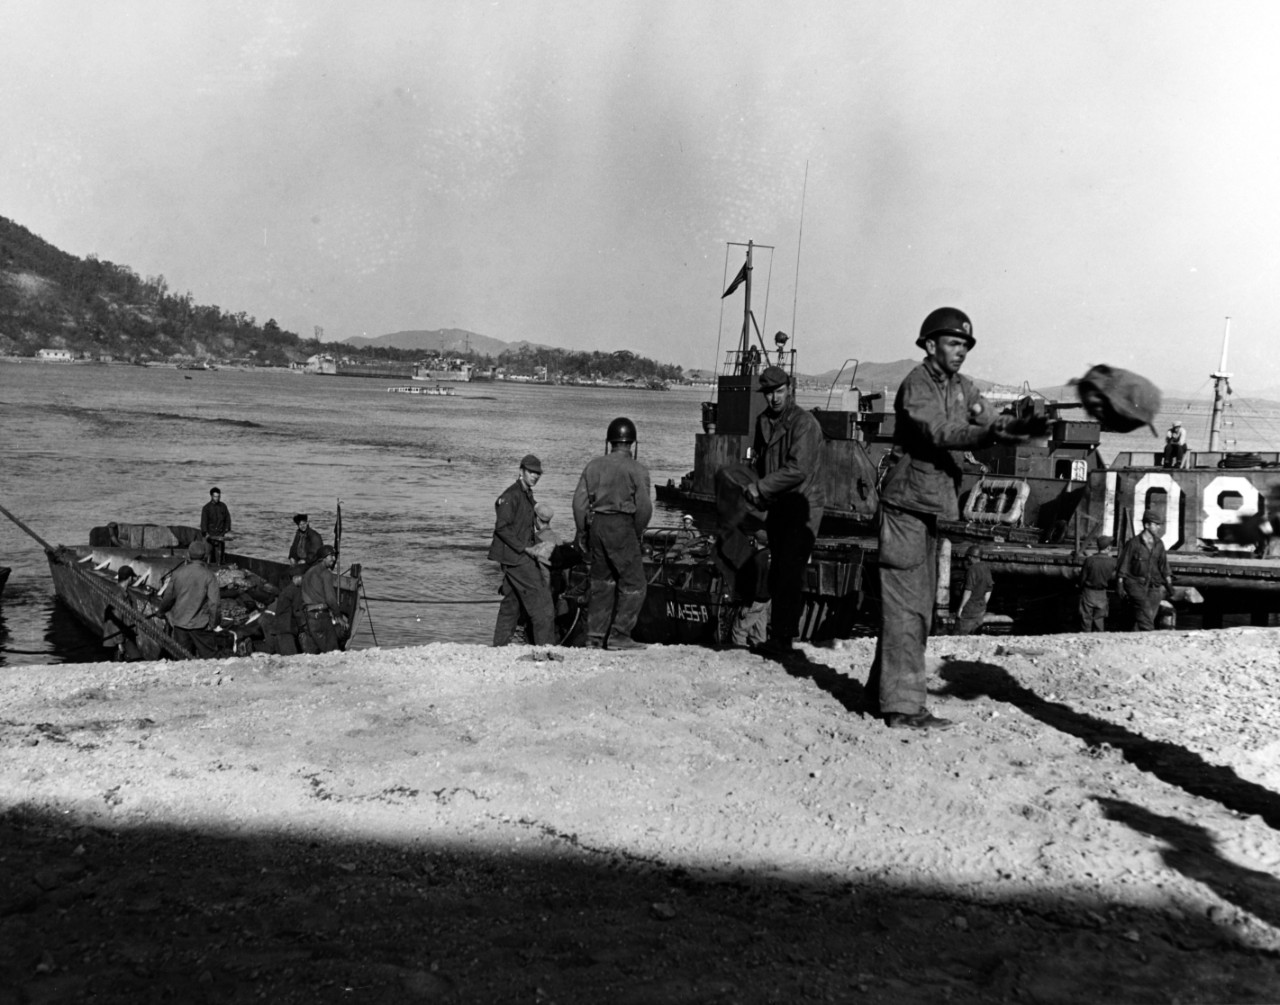 Troops unload landing craft at Inchon's Red Beach on 18 September 1950, three days after the initial landings there. The LCVP in the center is from USS Alshain (AKA-55). Wolmi-Do island is in the background.